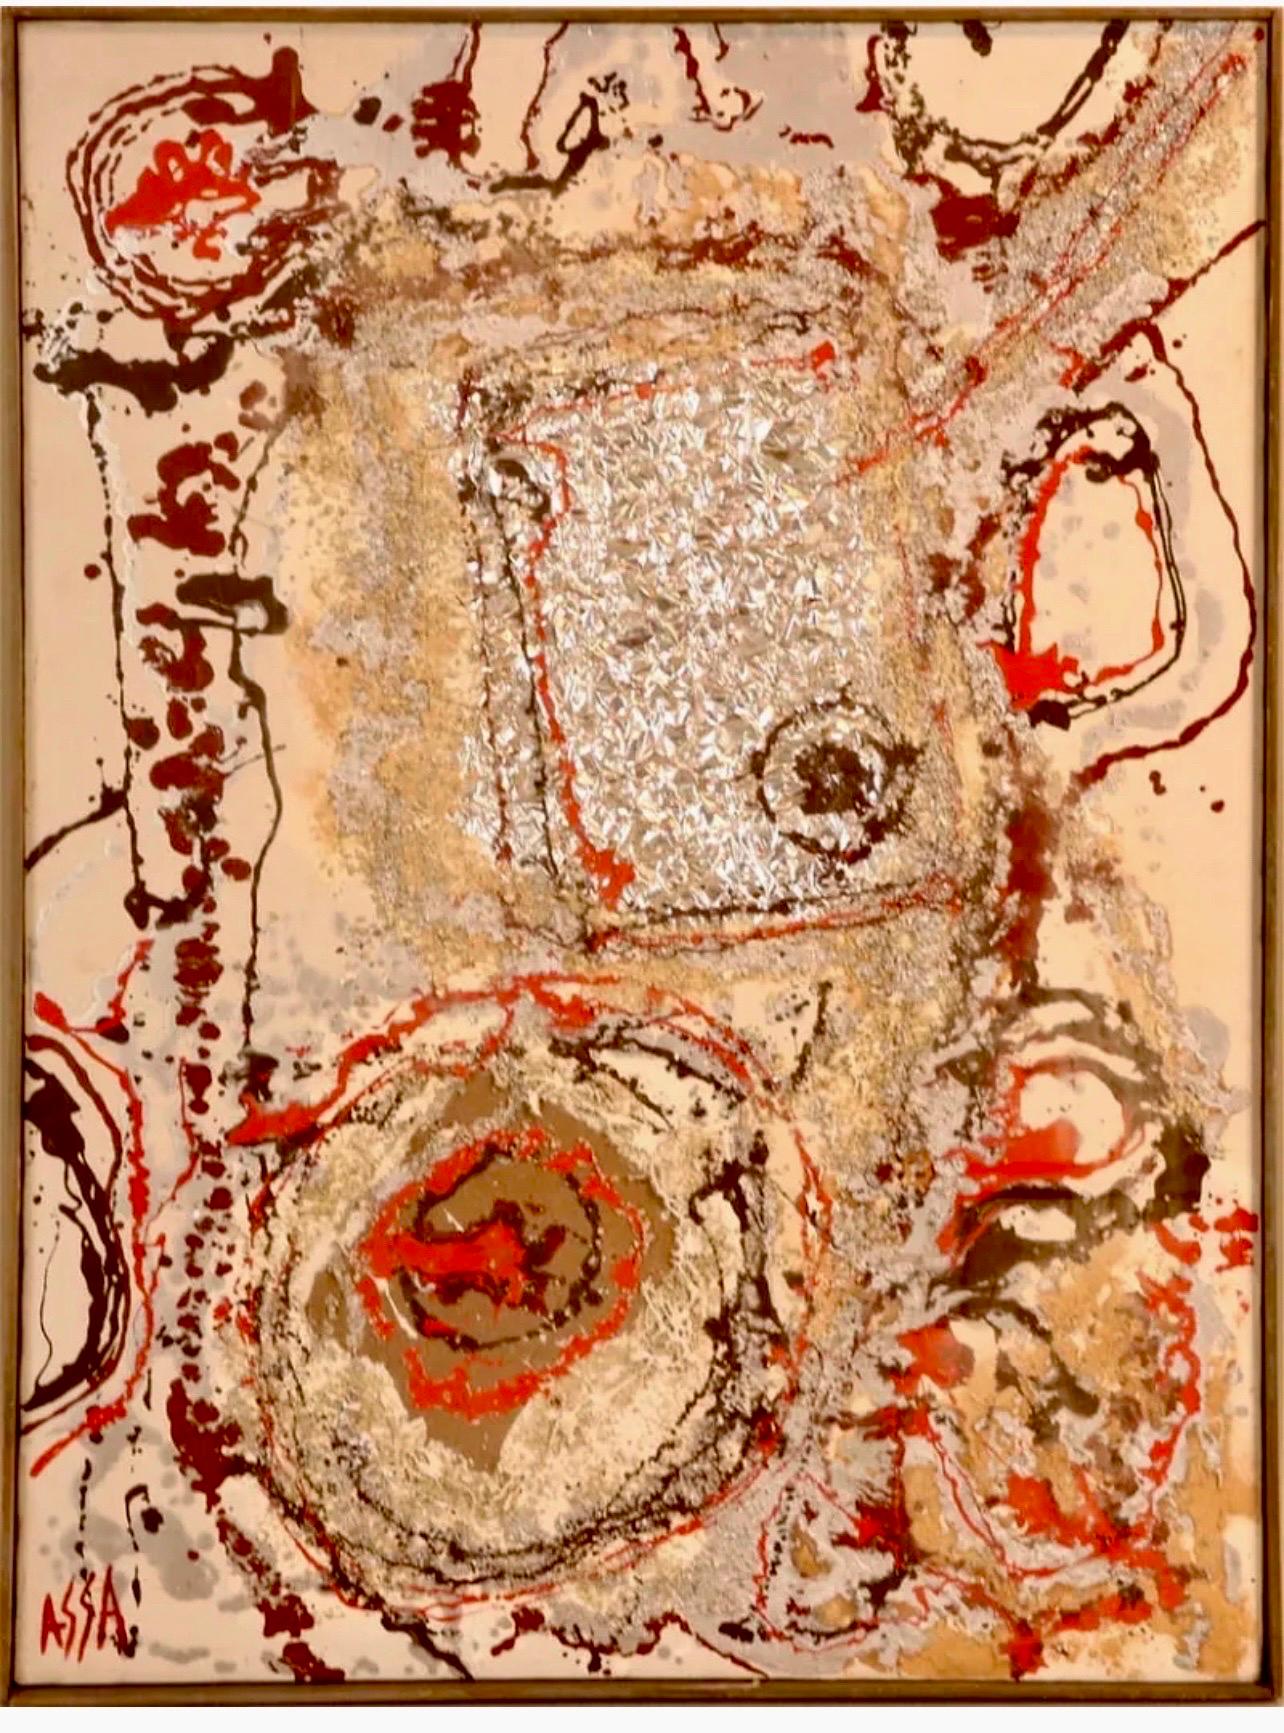 Modernist Persian Iranian Middle Eastern Abstract Fereydoun Assa Oil Painting For Sale 11